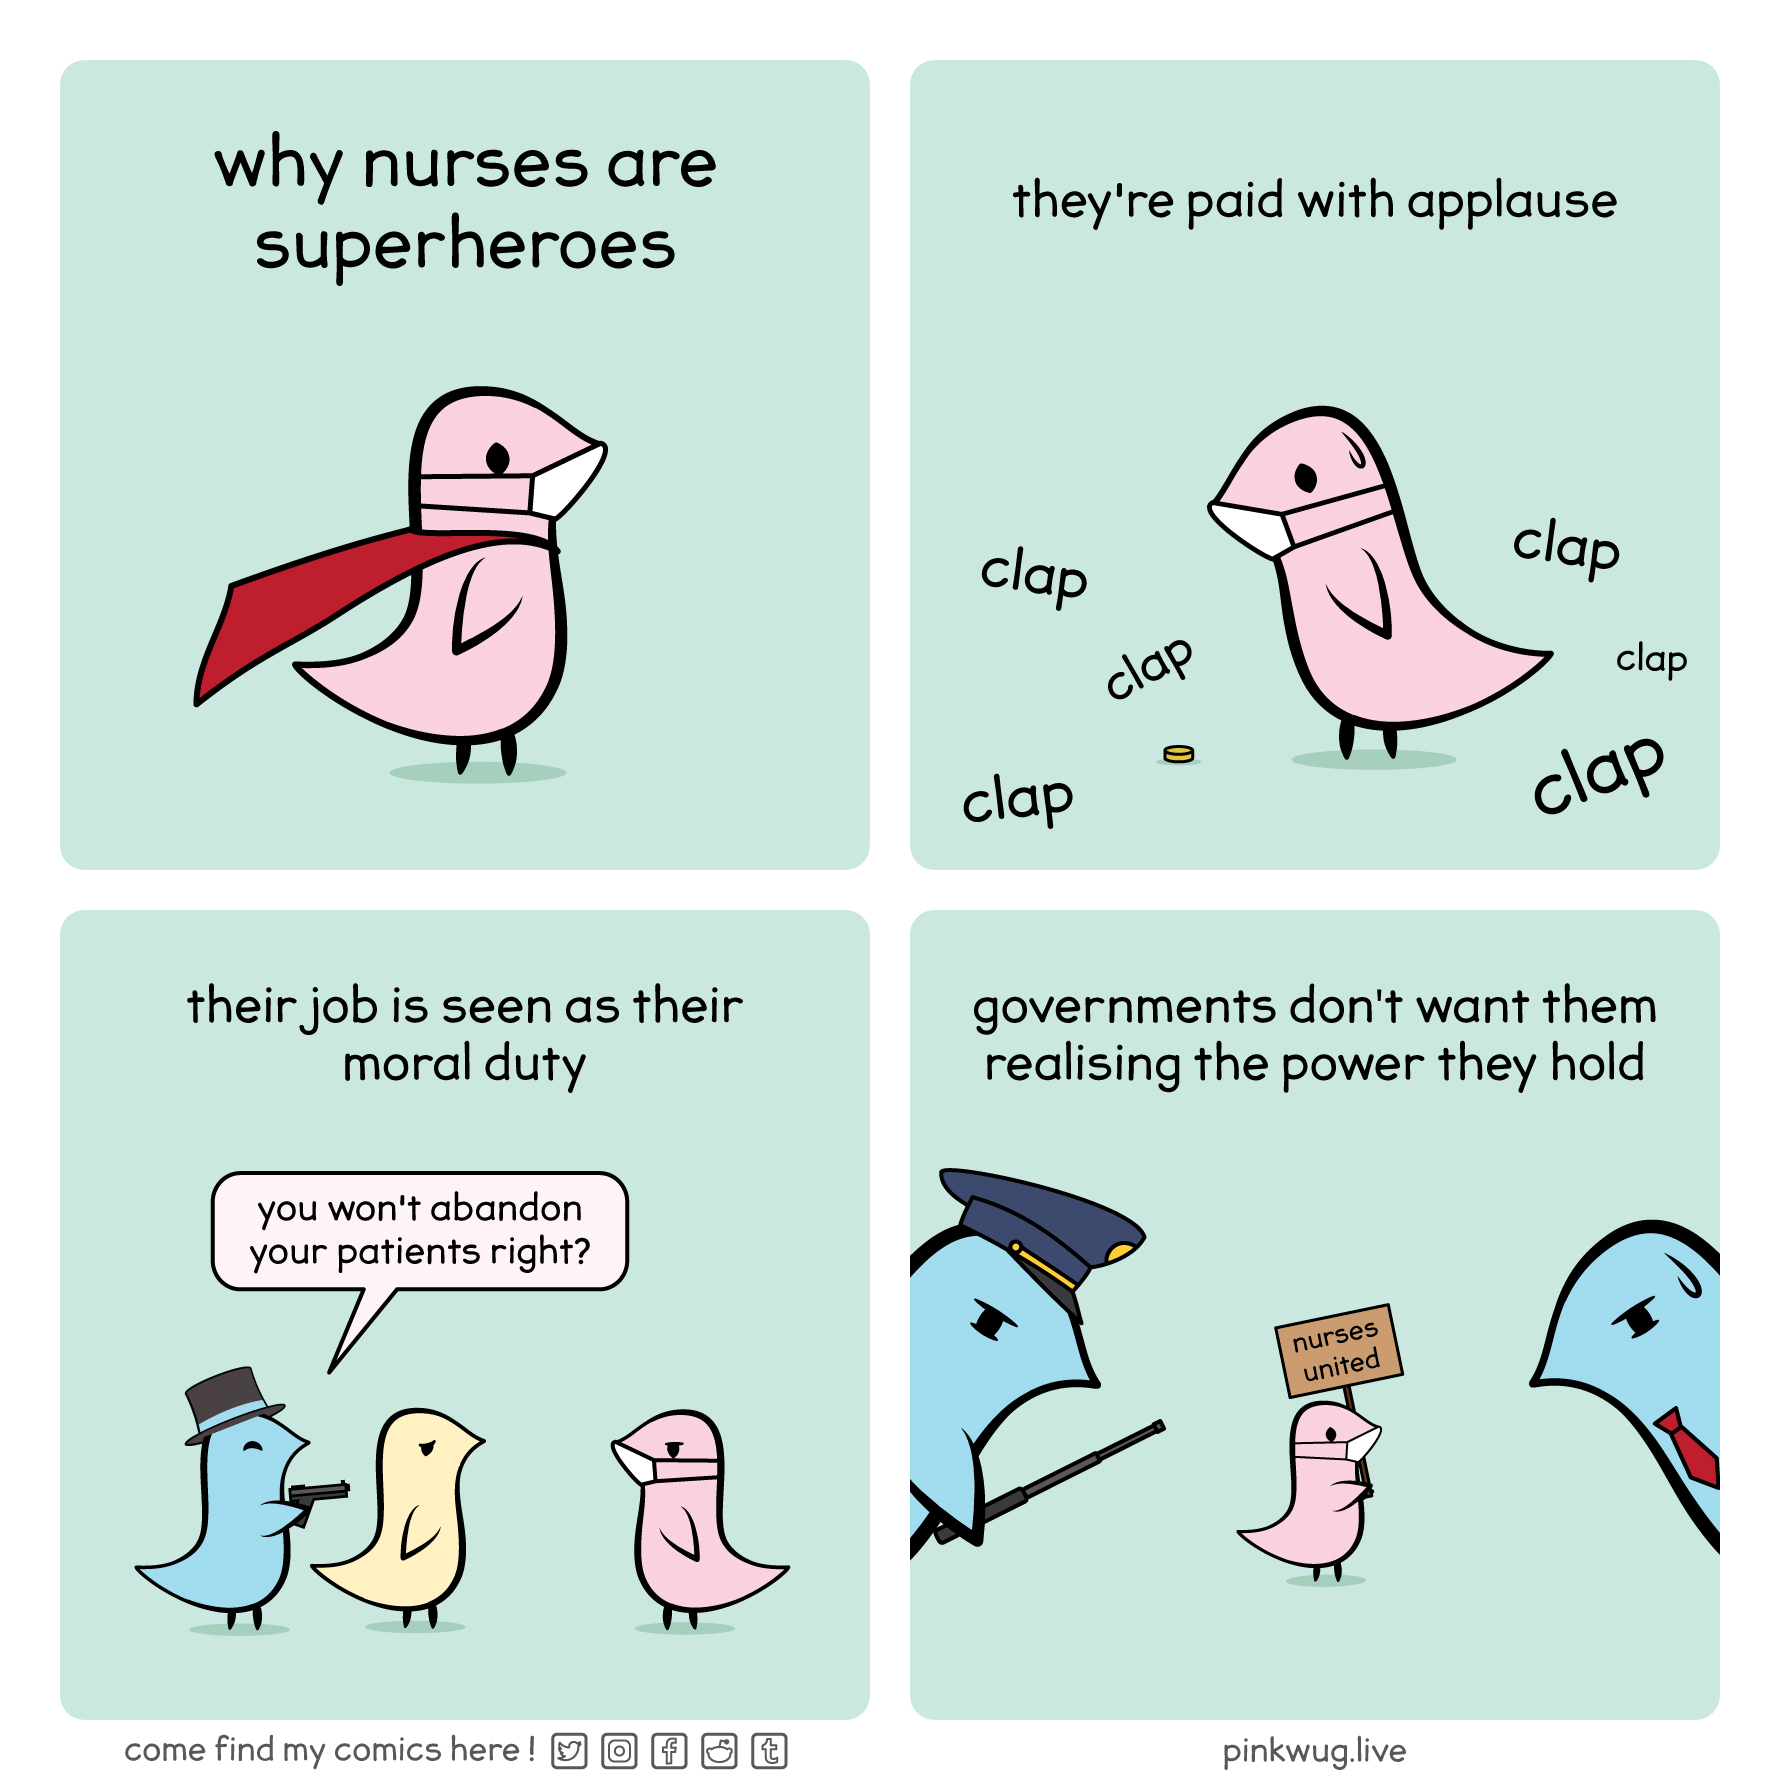 pinkwug comic: They're paid with applause (nurse is looking at a penny). 

Their job is seen as their moral duty (capitalist wug threatens the nurse with a gun and says 'you wont abandon your patients right?')

government don't want them realizing the power they hold (nurse carrying a sign for 'nurses united' while a cop and guy in suit glare)